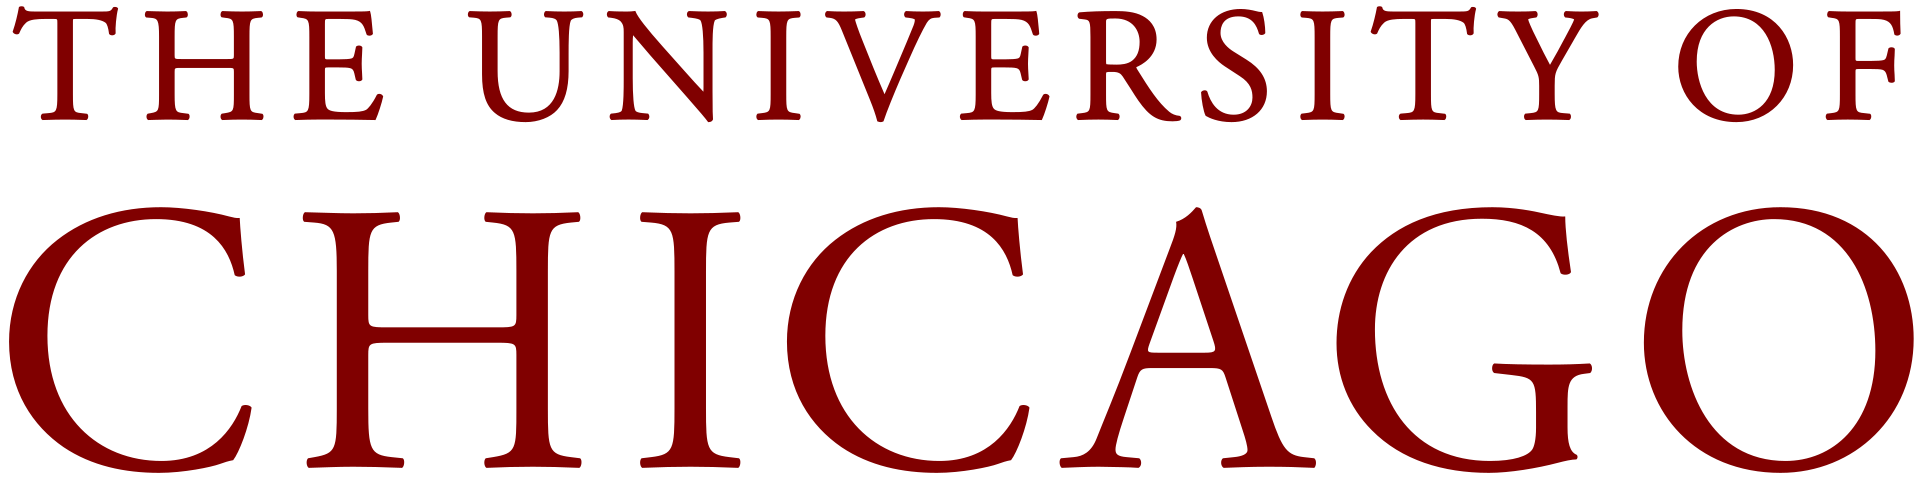 University of Chicago logo, By University of Chicago - http://communications.uchicago.edu/sites/all/files/communications/身份/uchicago.身份.的指导方针.pdf, 公共领域, http://commons.维基.org/w/index.php?curid = 66222713 "